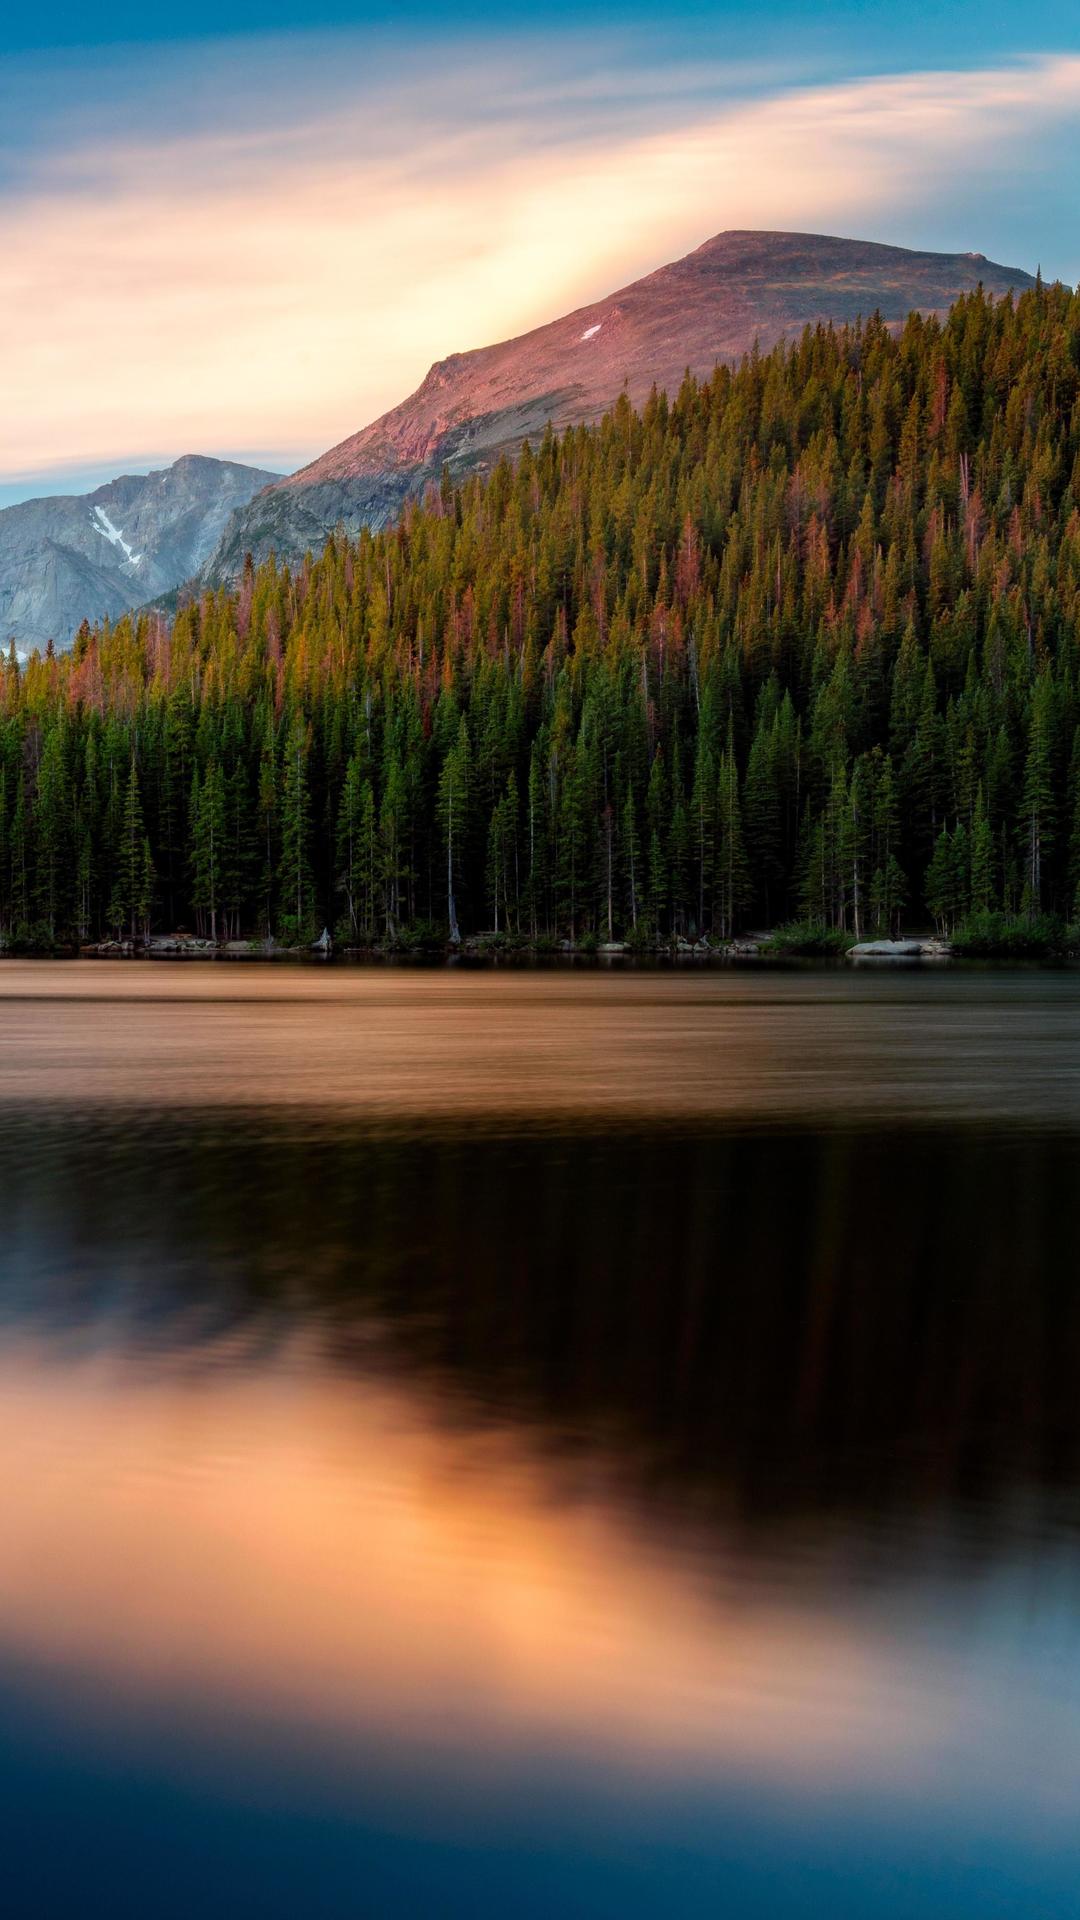 IPhone wallpaper of a forest and mountain lake at sunset - Lake